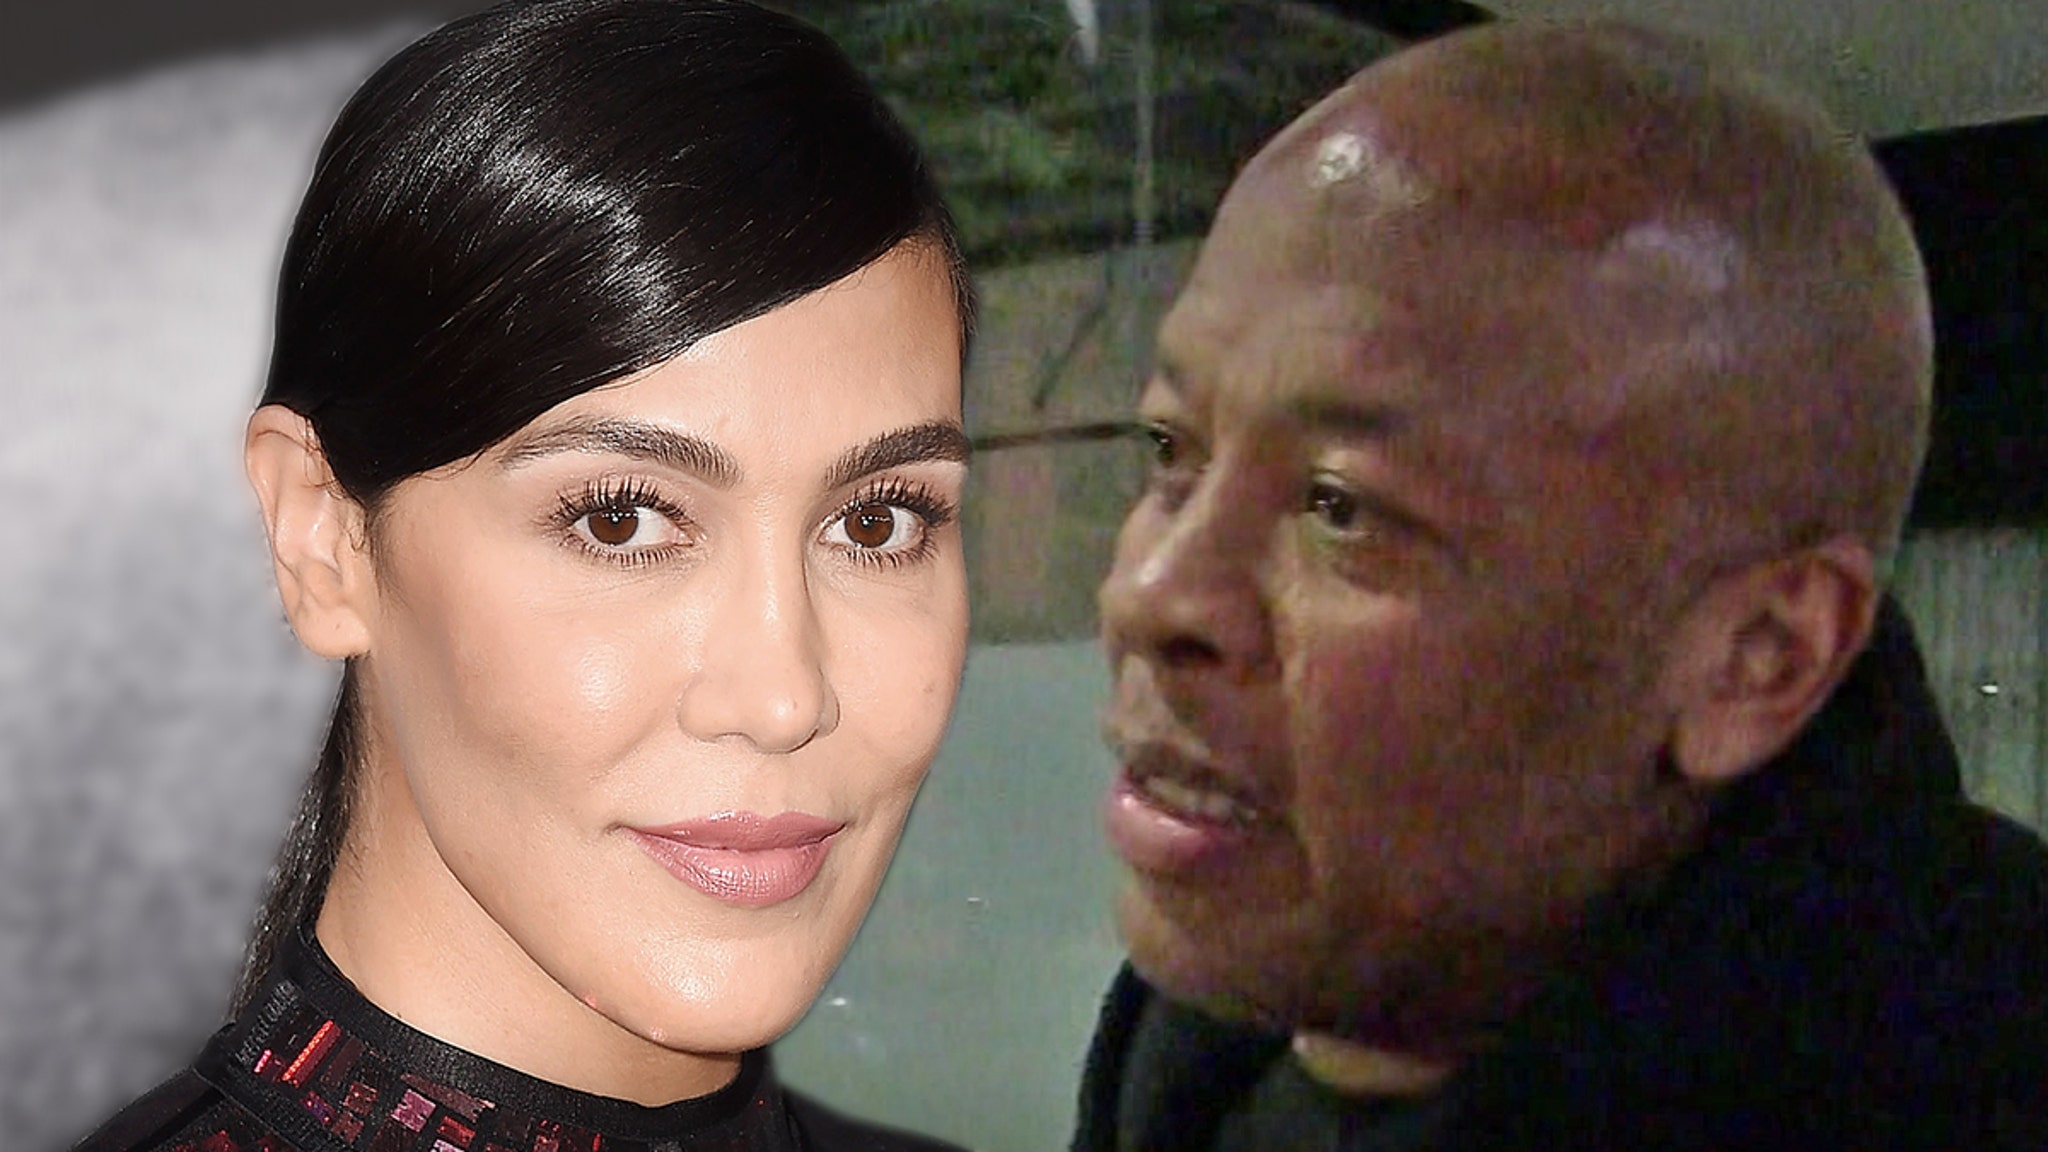 Dr. Dre’s estranged wife claims he has $ 262 million in cash, Apple shares